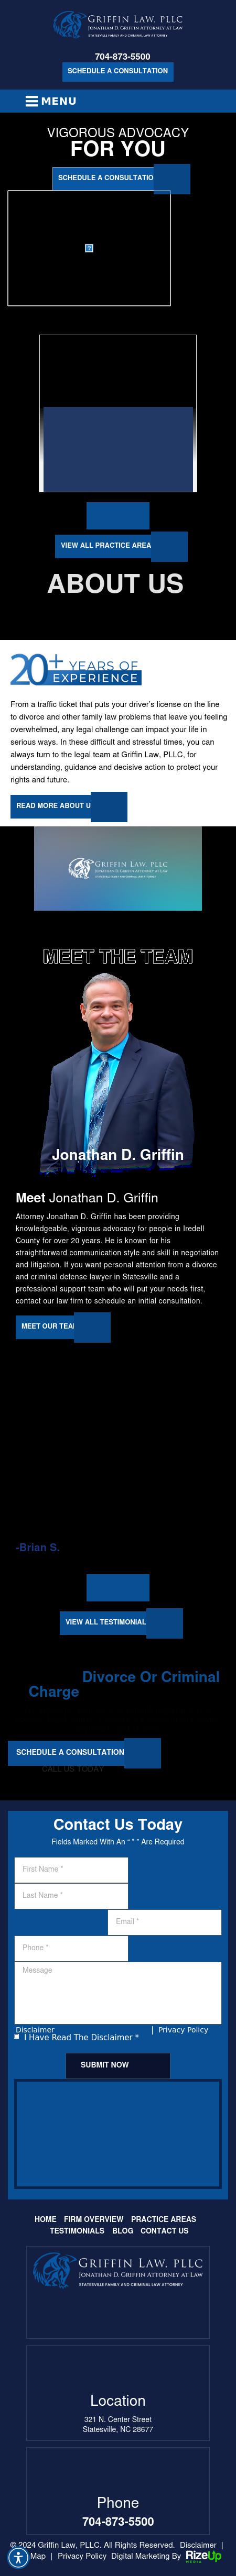 Griffin Law, PLLC - Statesville NC Lawyers